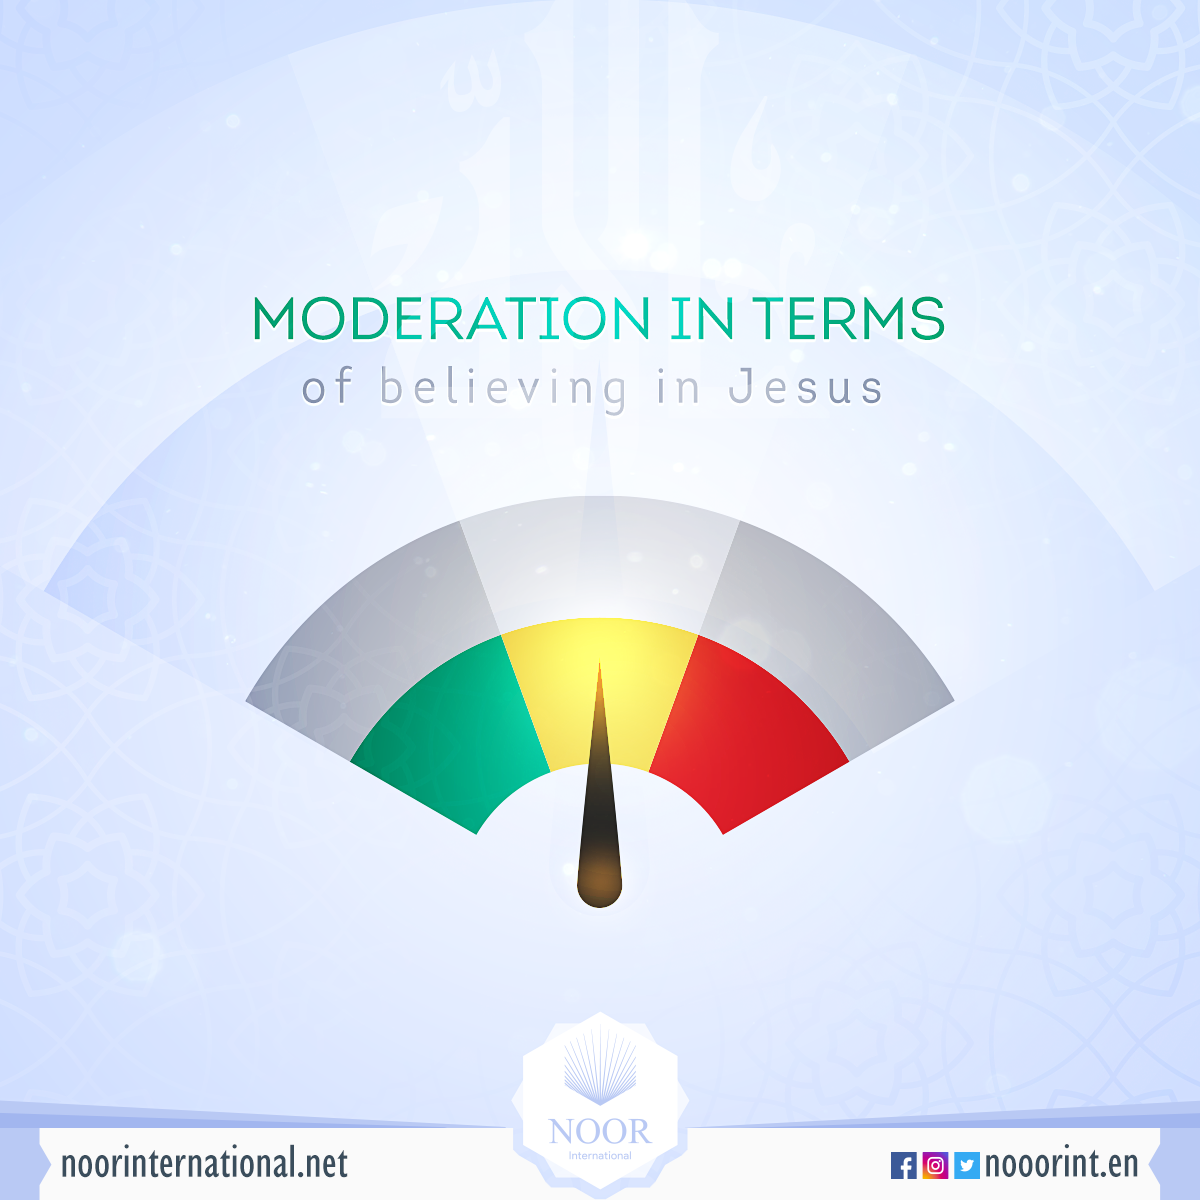 Moderation in terms of believing in the Christ